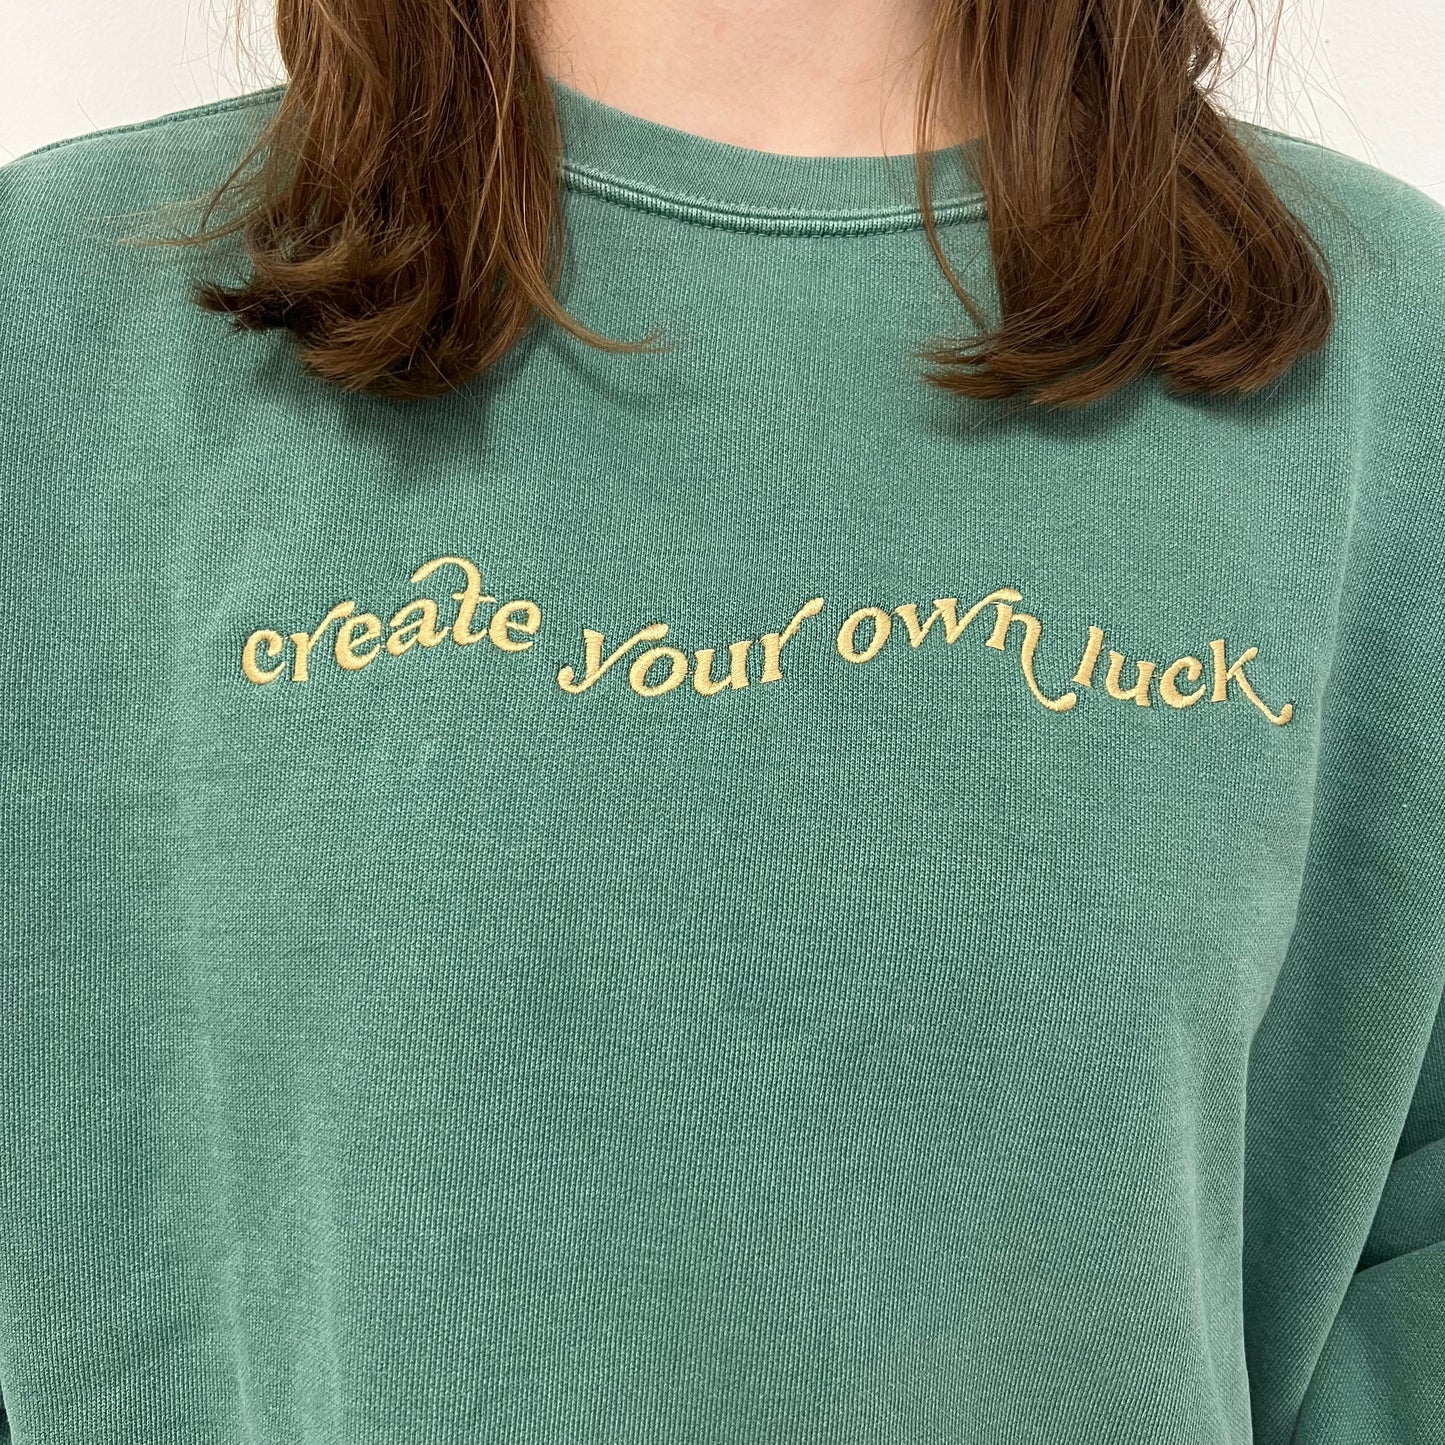 Green Create Your Own Luck Comfort Luxe Embroidered Crewneck Sweatshirt